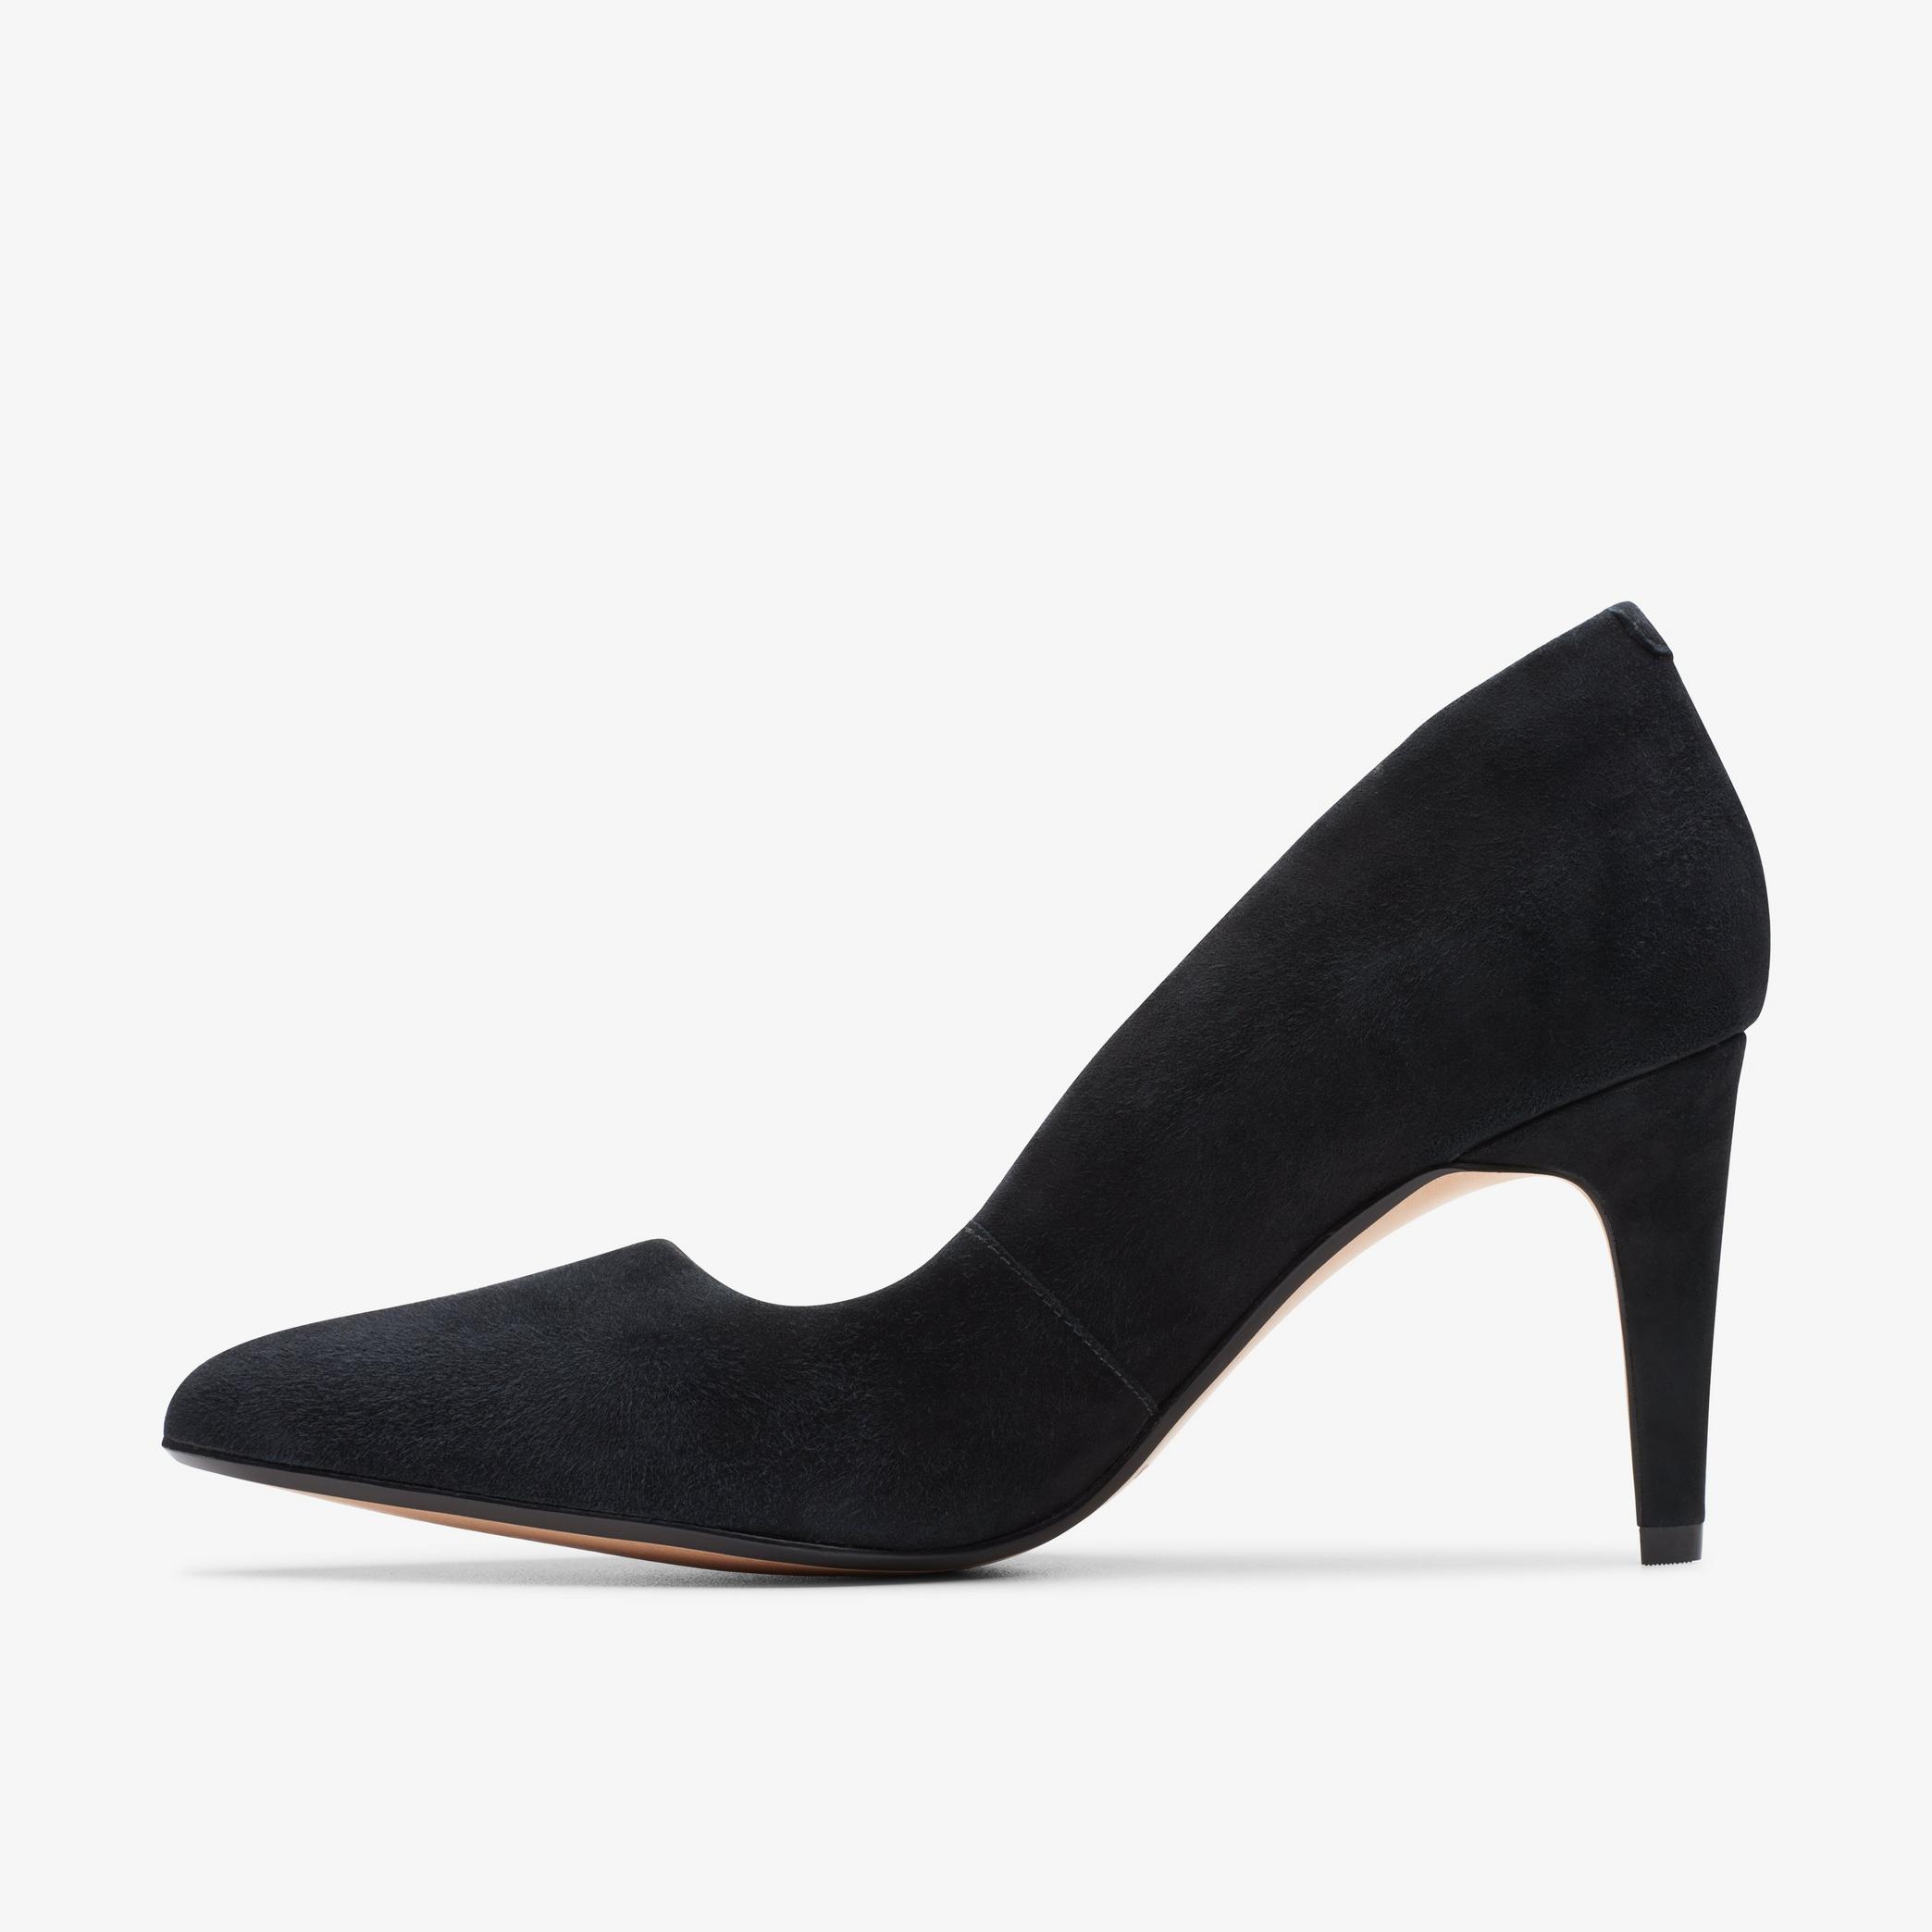 Laina Rae Black Suede Court Shoes, view 2 of 6